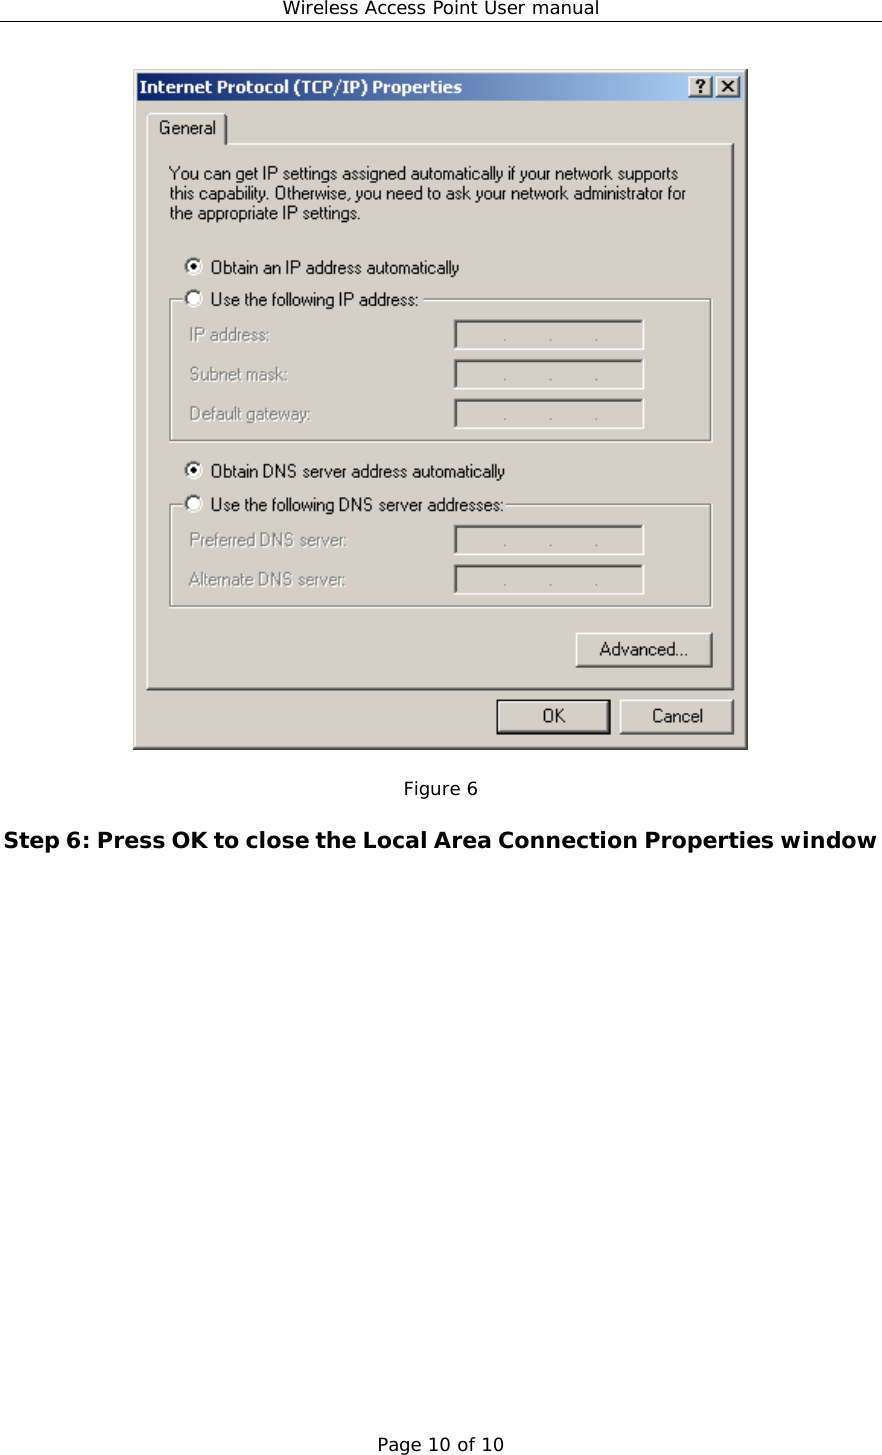 Wireless Access Point User manual Page 10 of 10   Figure 6  Step 6: Press OK to close the Local Area Connection Properties window 